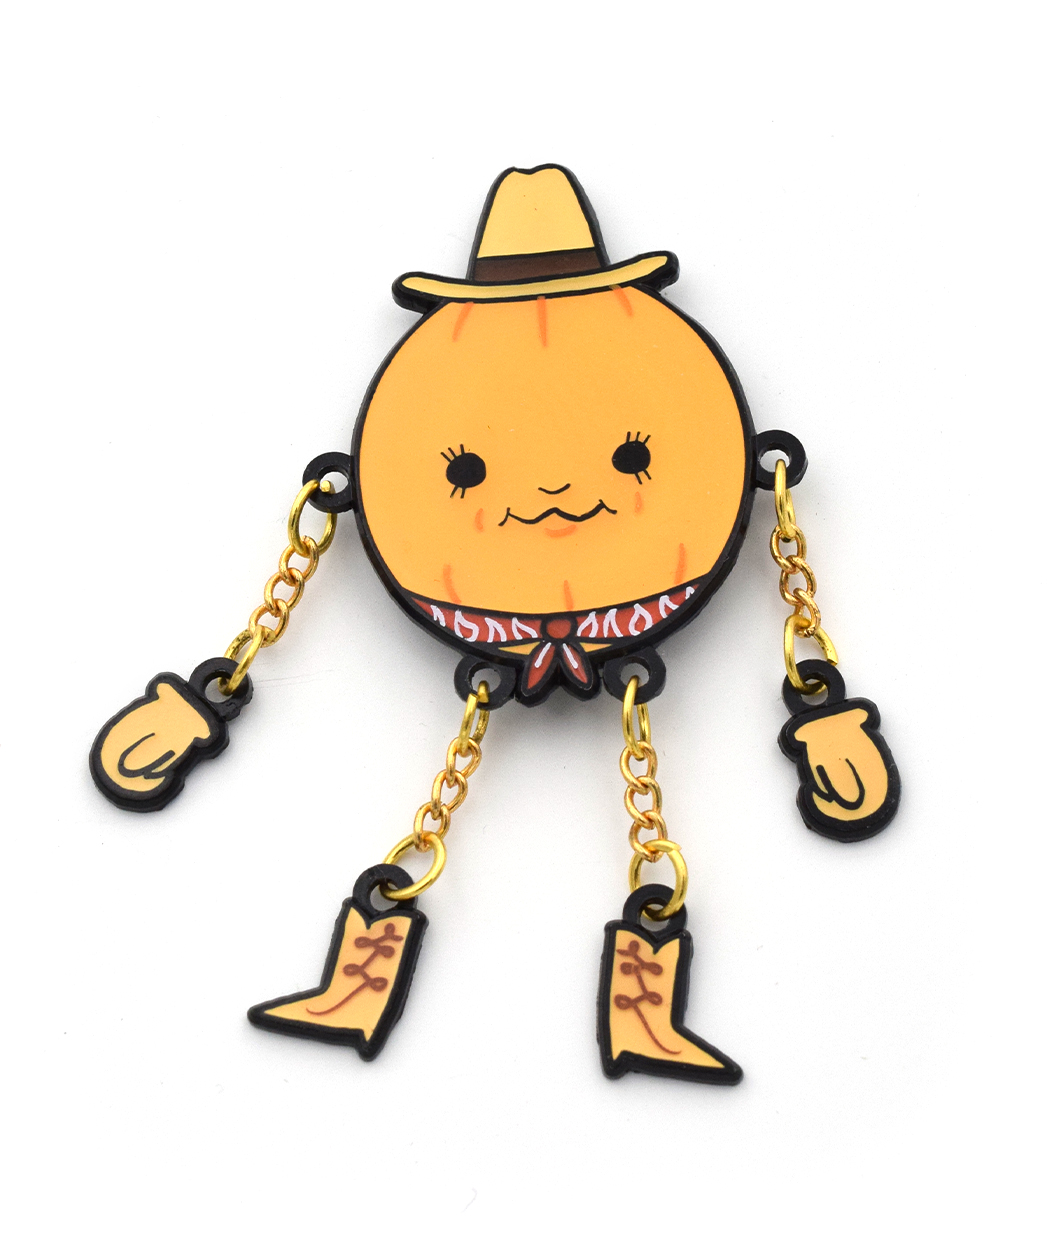 A pumpkin dressed like a cowboy, wearing a cowboy hat and a bandana. Each hand and cowboy boot is connected to the body with a small gold chain. From Brian David Gilbert.